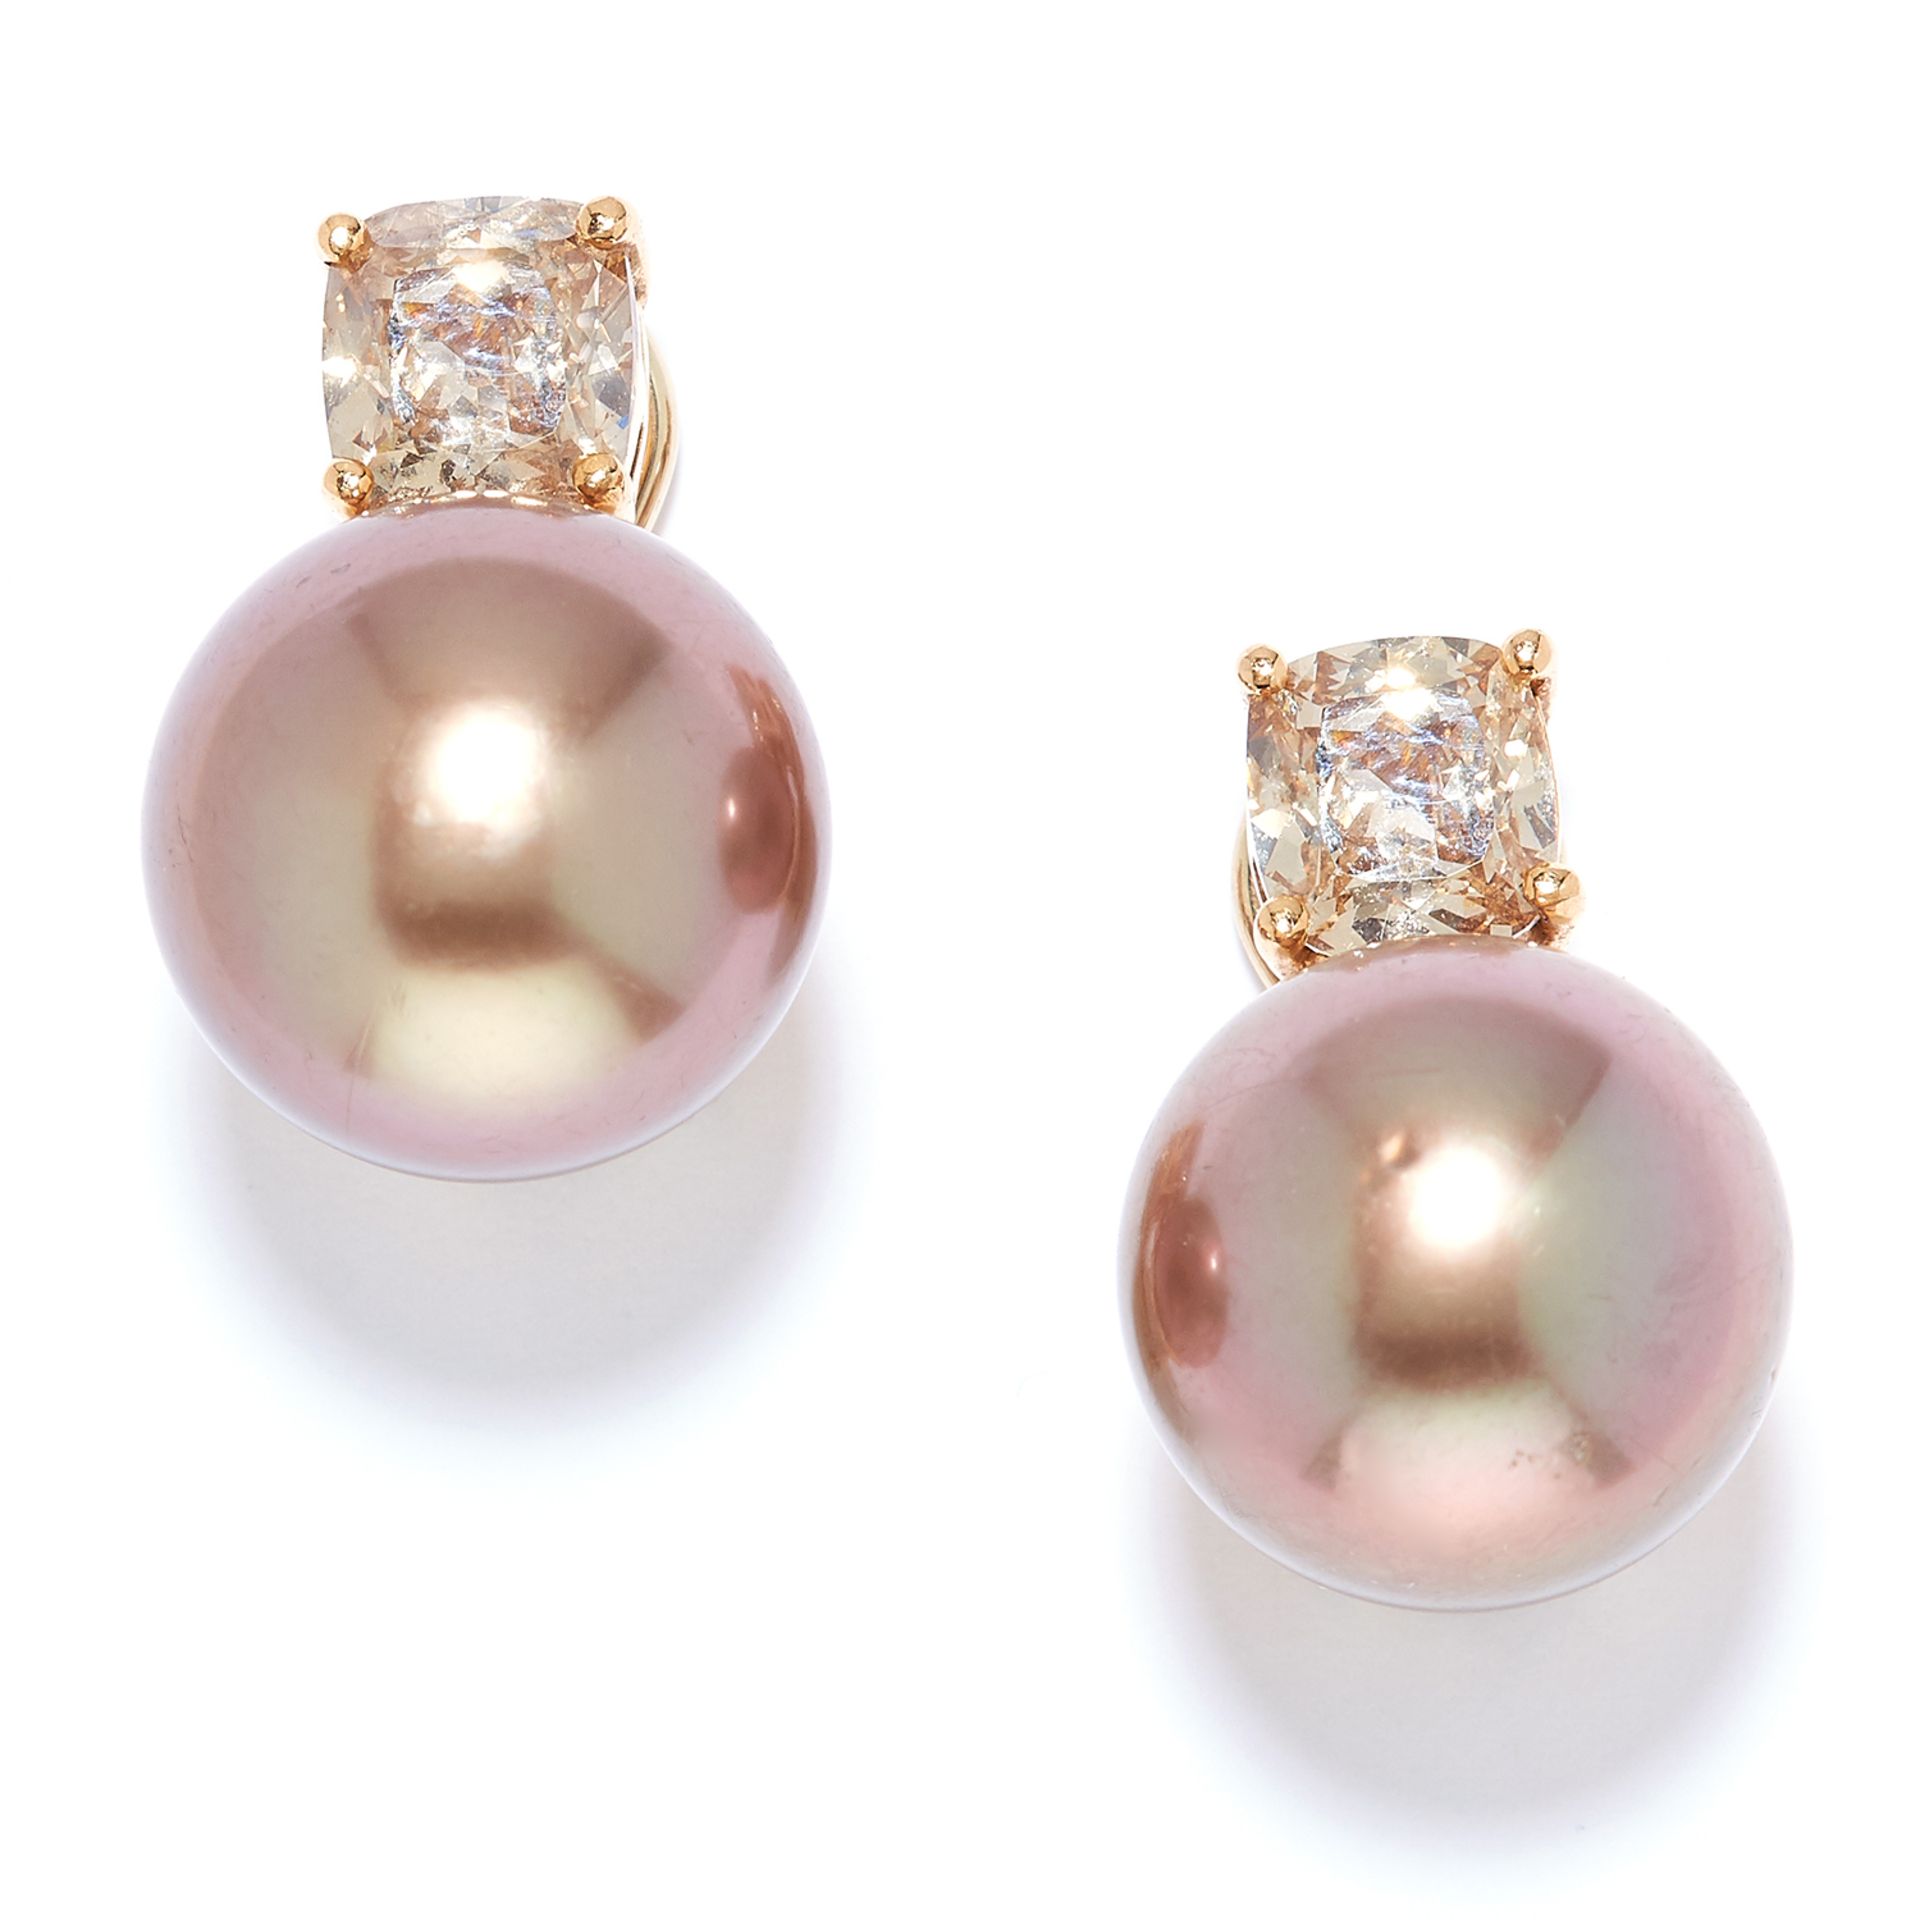 PEARL AND 2.50 CARAT FANCY COLOUR DIAMOND EARRINGS in 18ct yellow gold, each set with a cushion